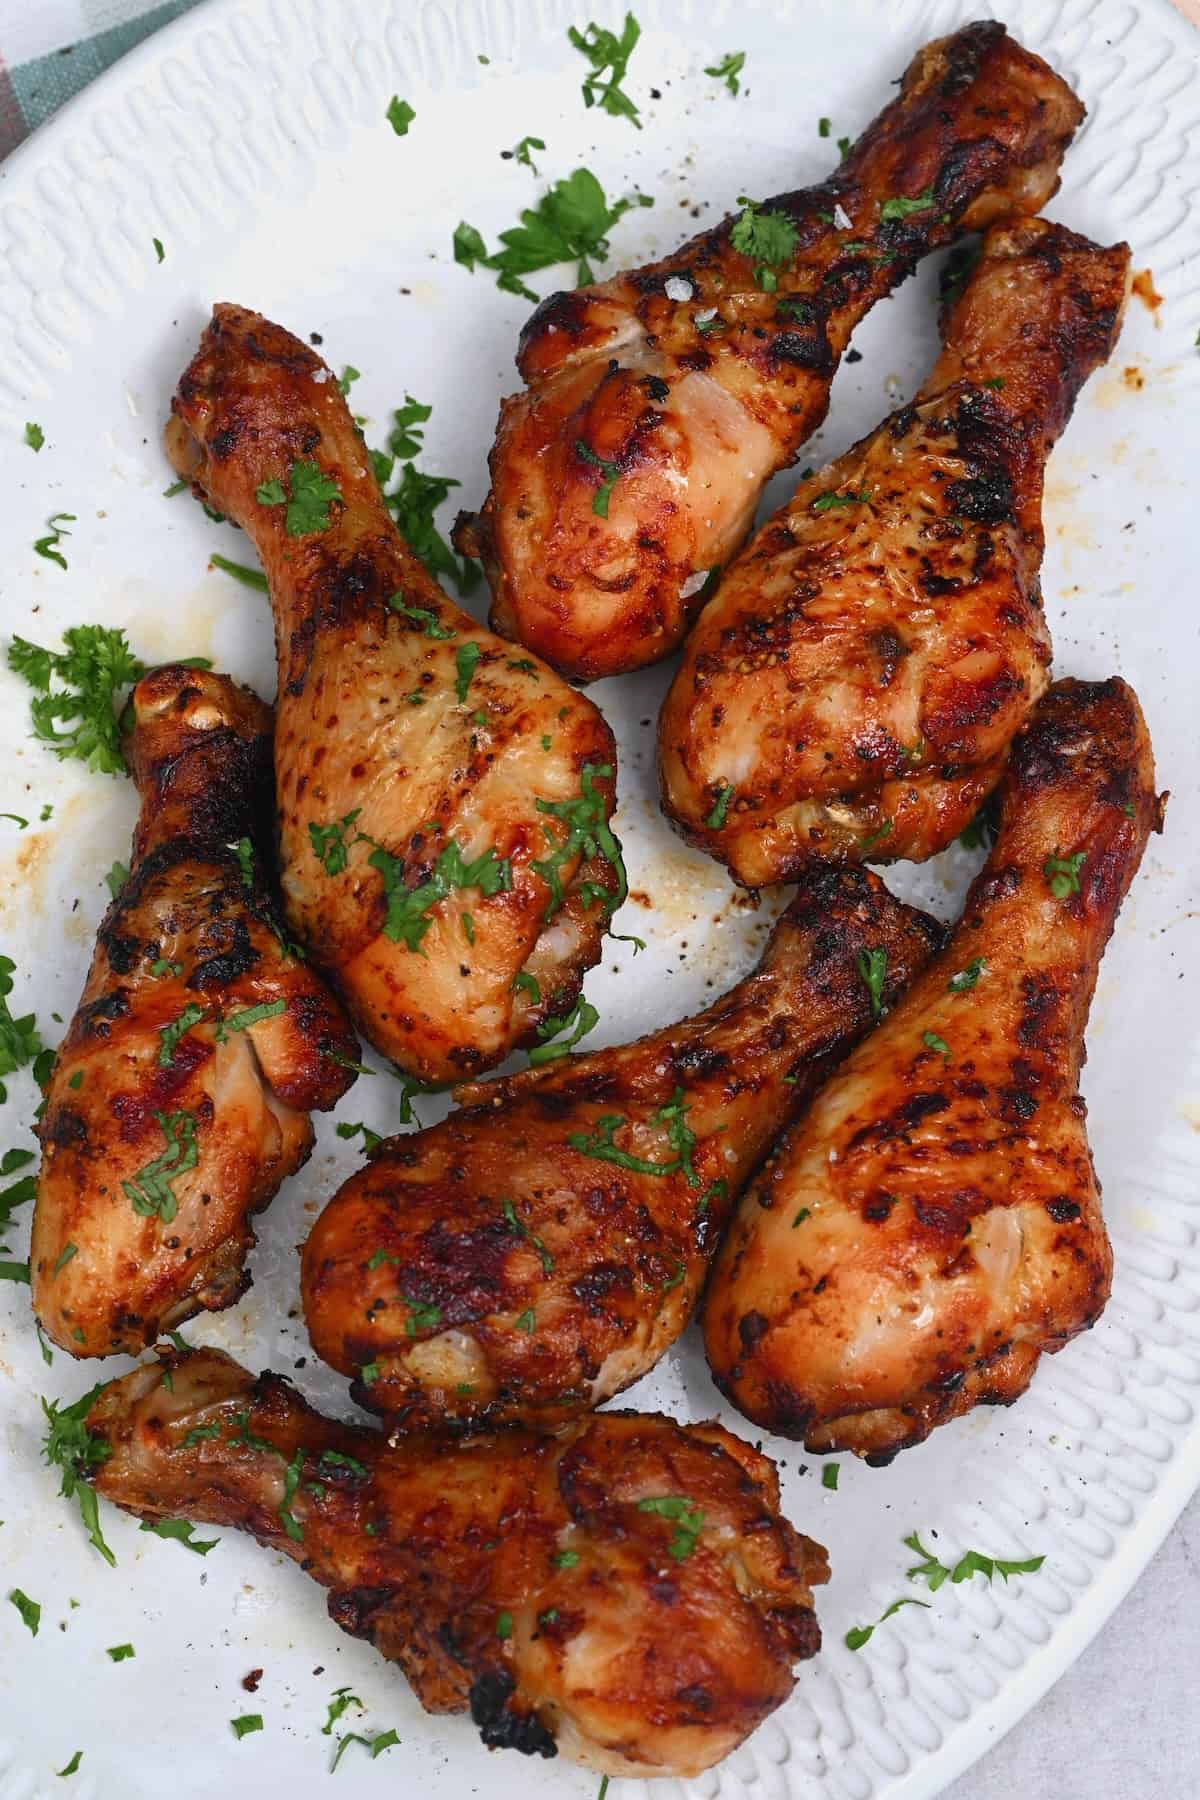 Chicken drumsticks topped with parsley